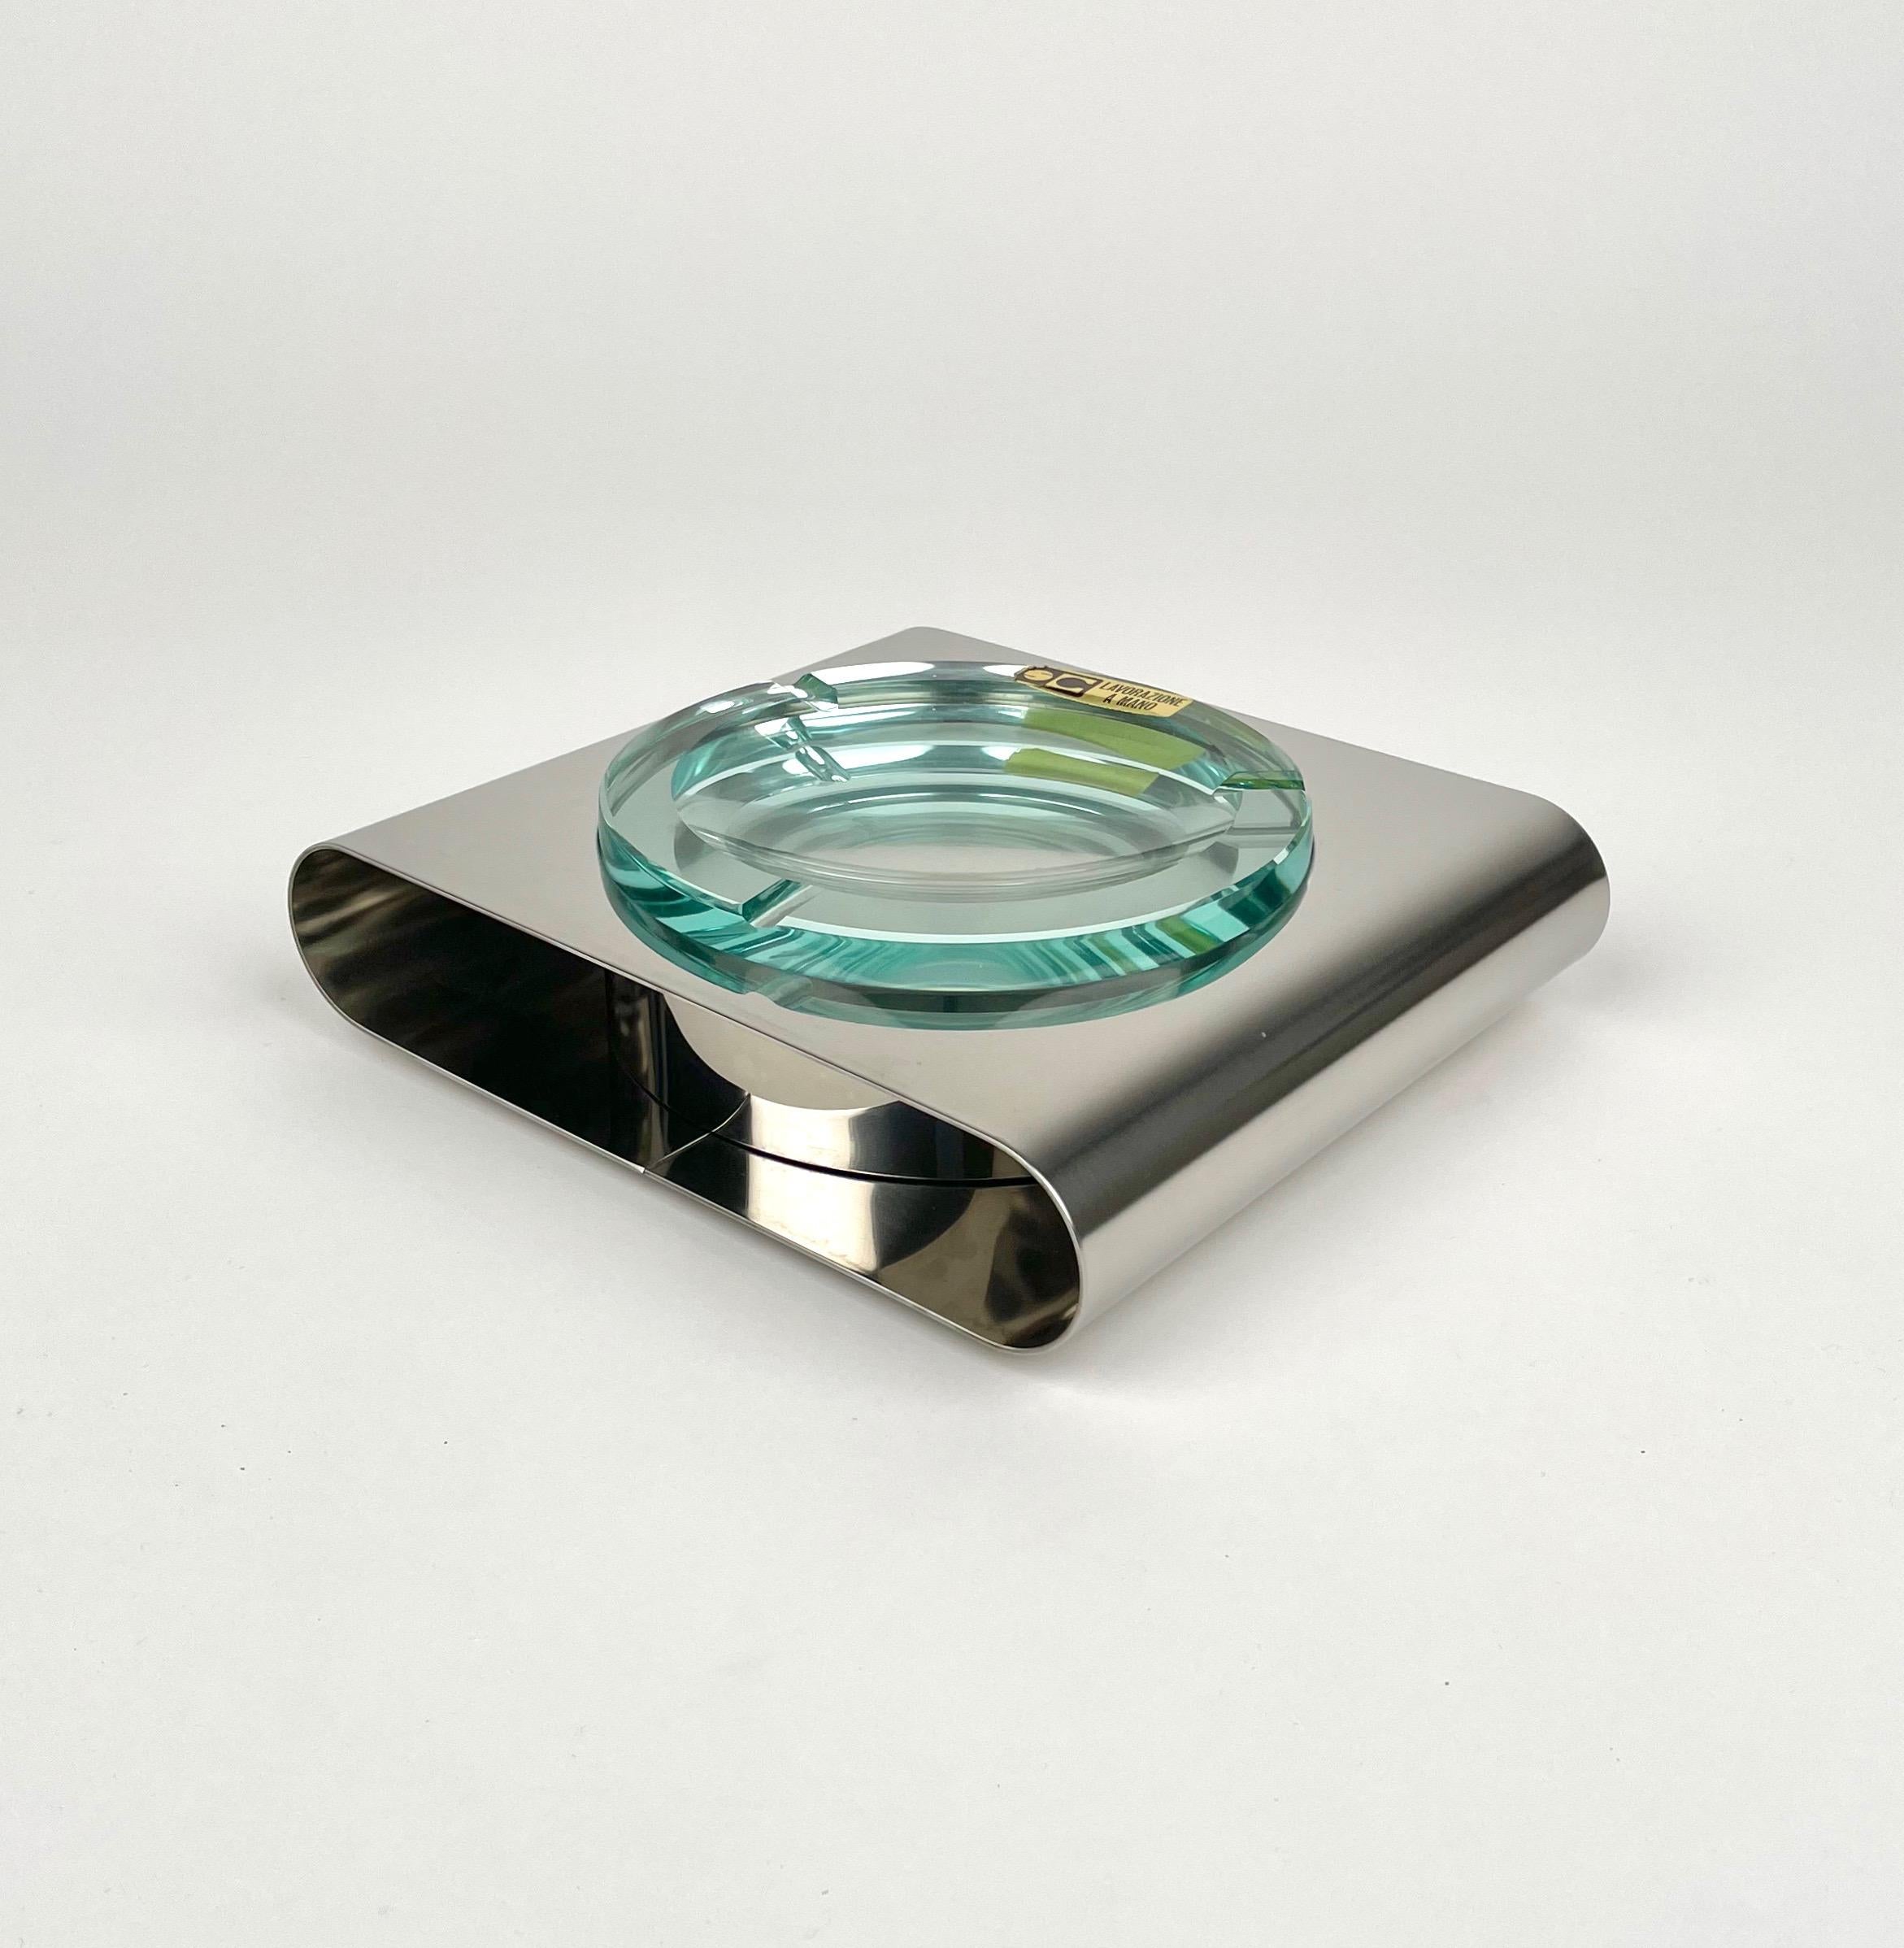 Ashtray Sena Cristal Steel and Green Glass, Italy, 1970s For Sale 1